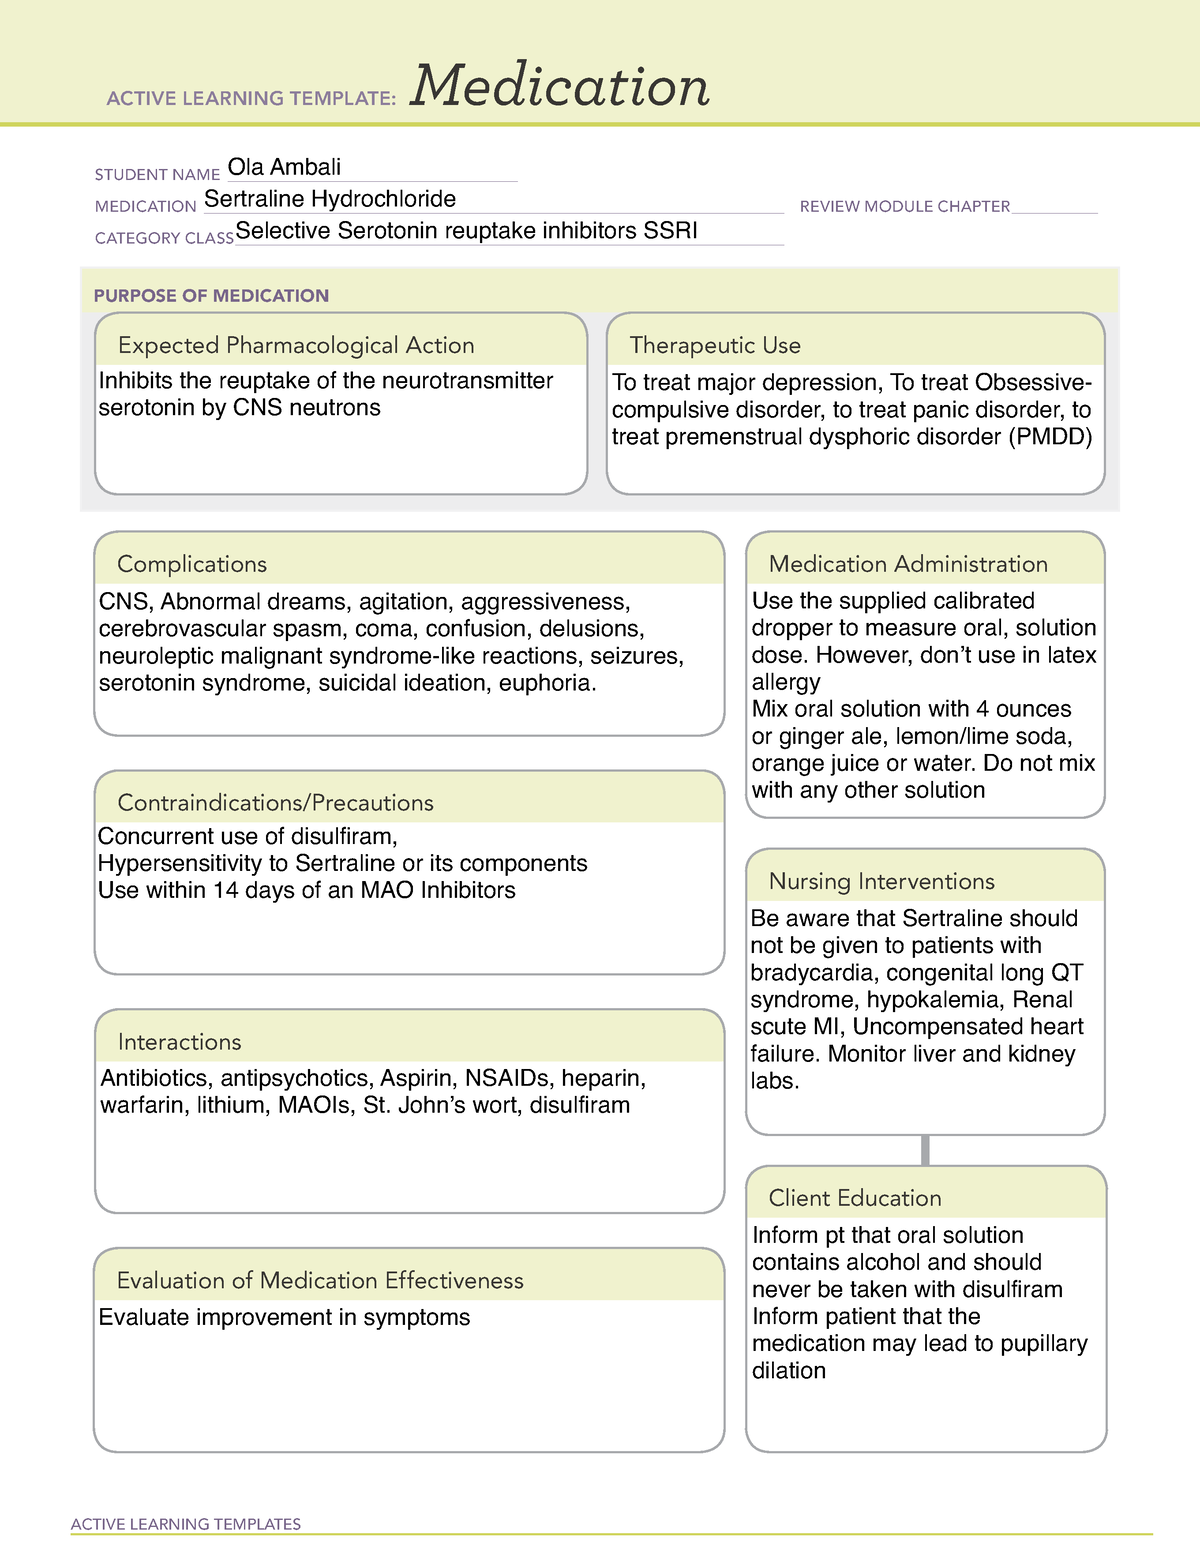 sertraline-hydrochloride-med-template-active-learning-templates